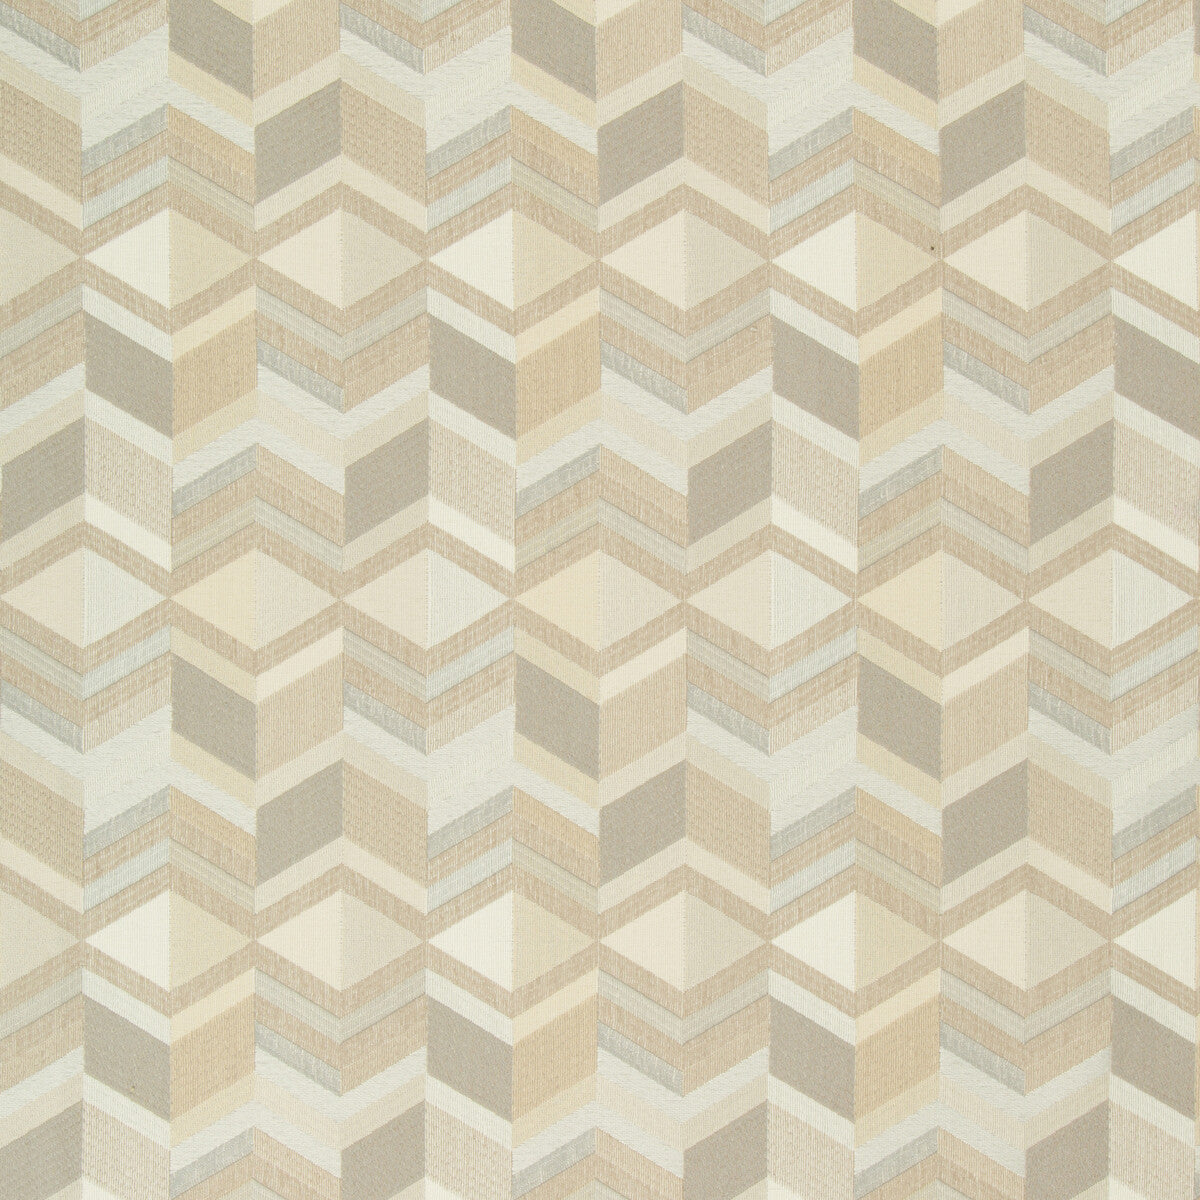 Kravet Design fabric in 35014-1616 color - pattern 35014.1616.0 - by Kravet Design in the Performance Crypton Home collection